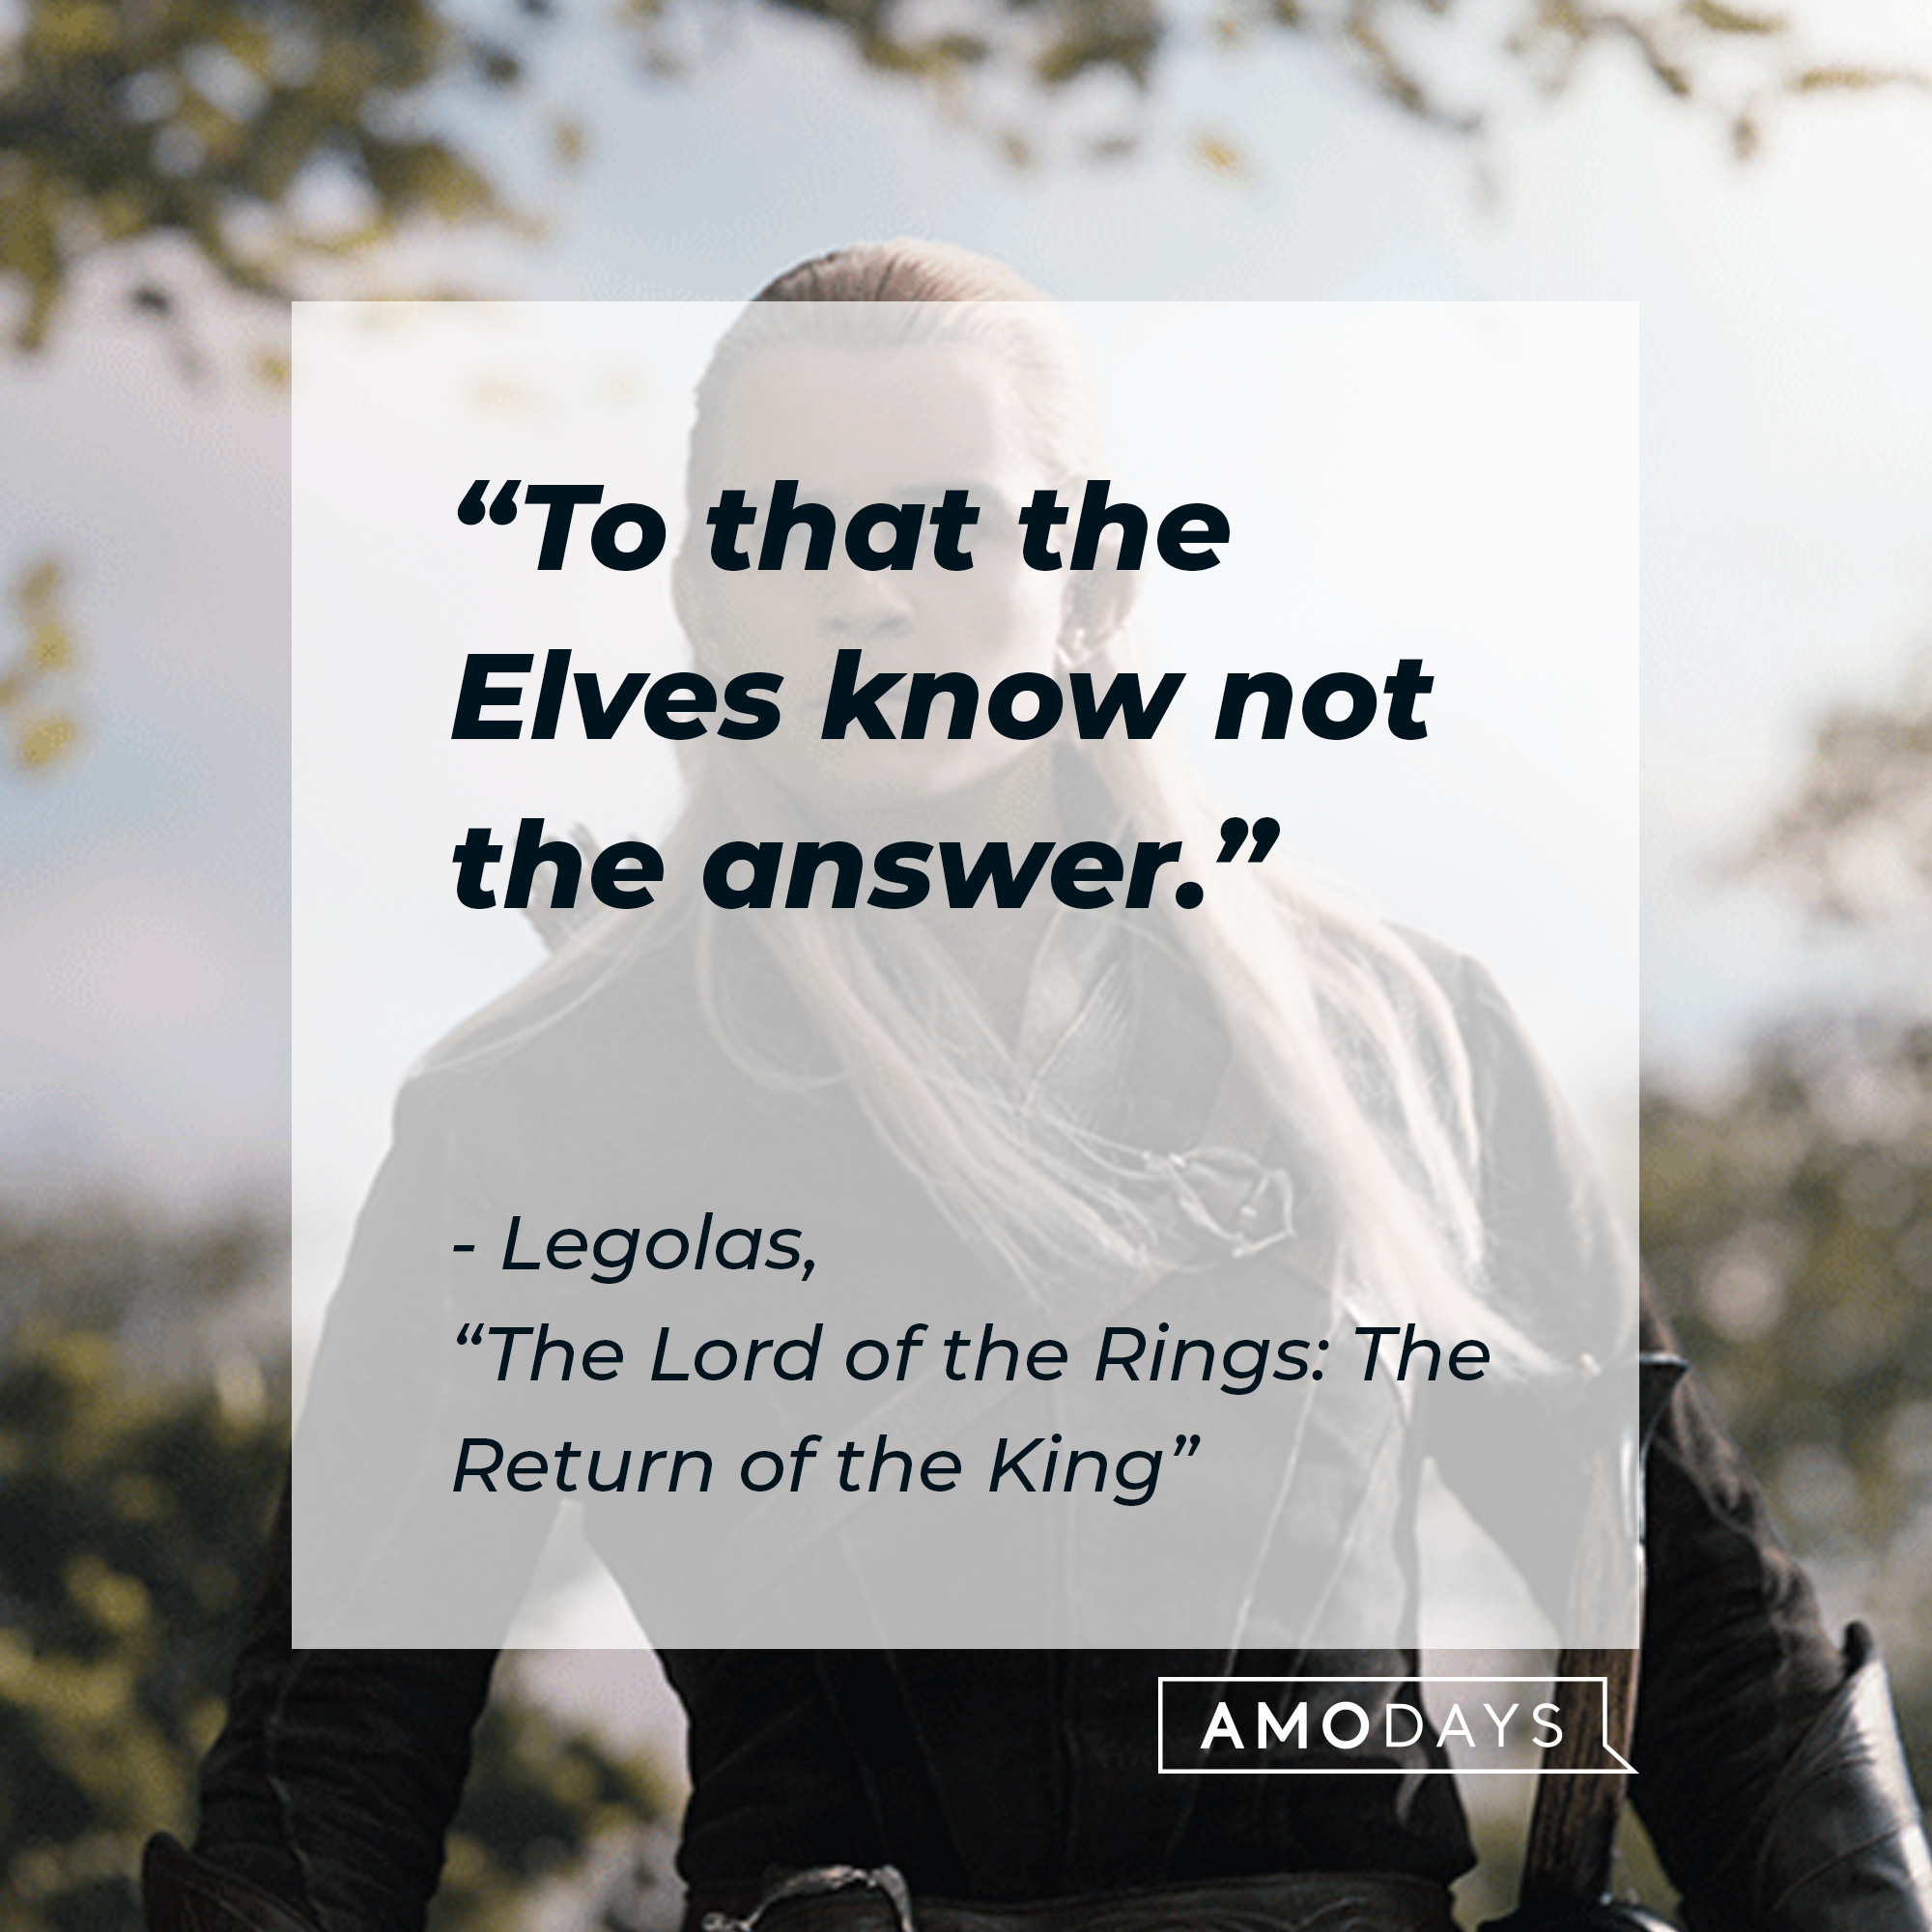 Legolas with his quote: "To that the Elves know not the answer."  | Source: Facebook.com/lordoftheringstrilogy